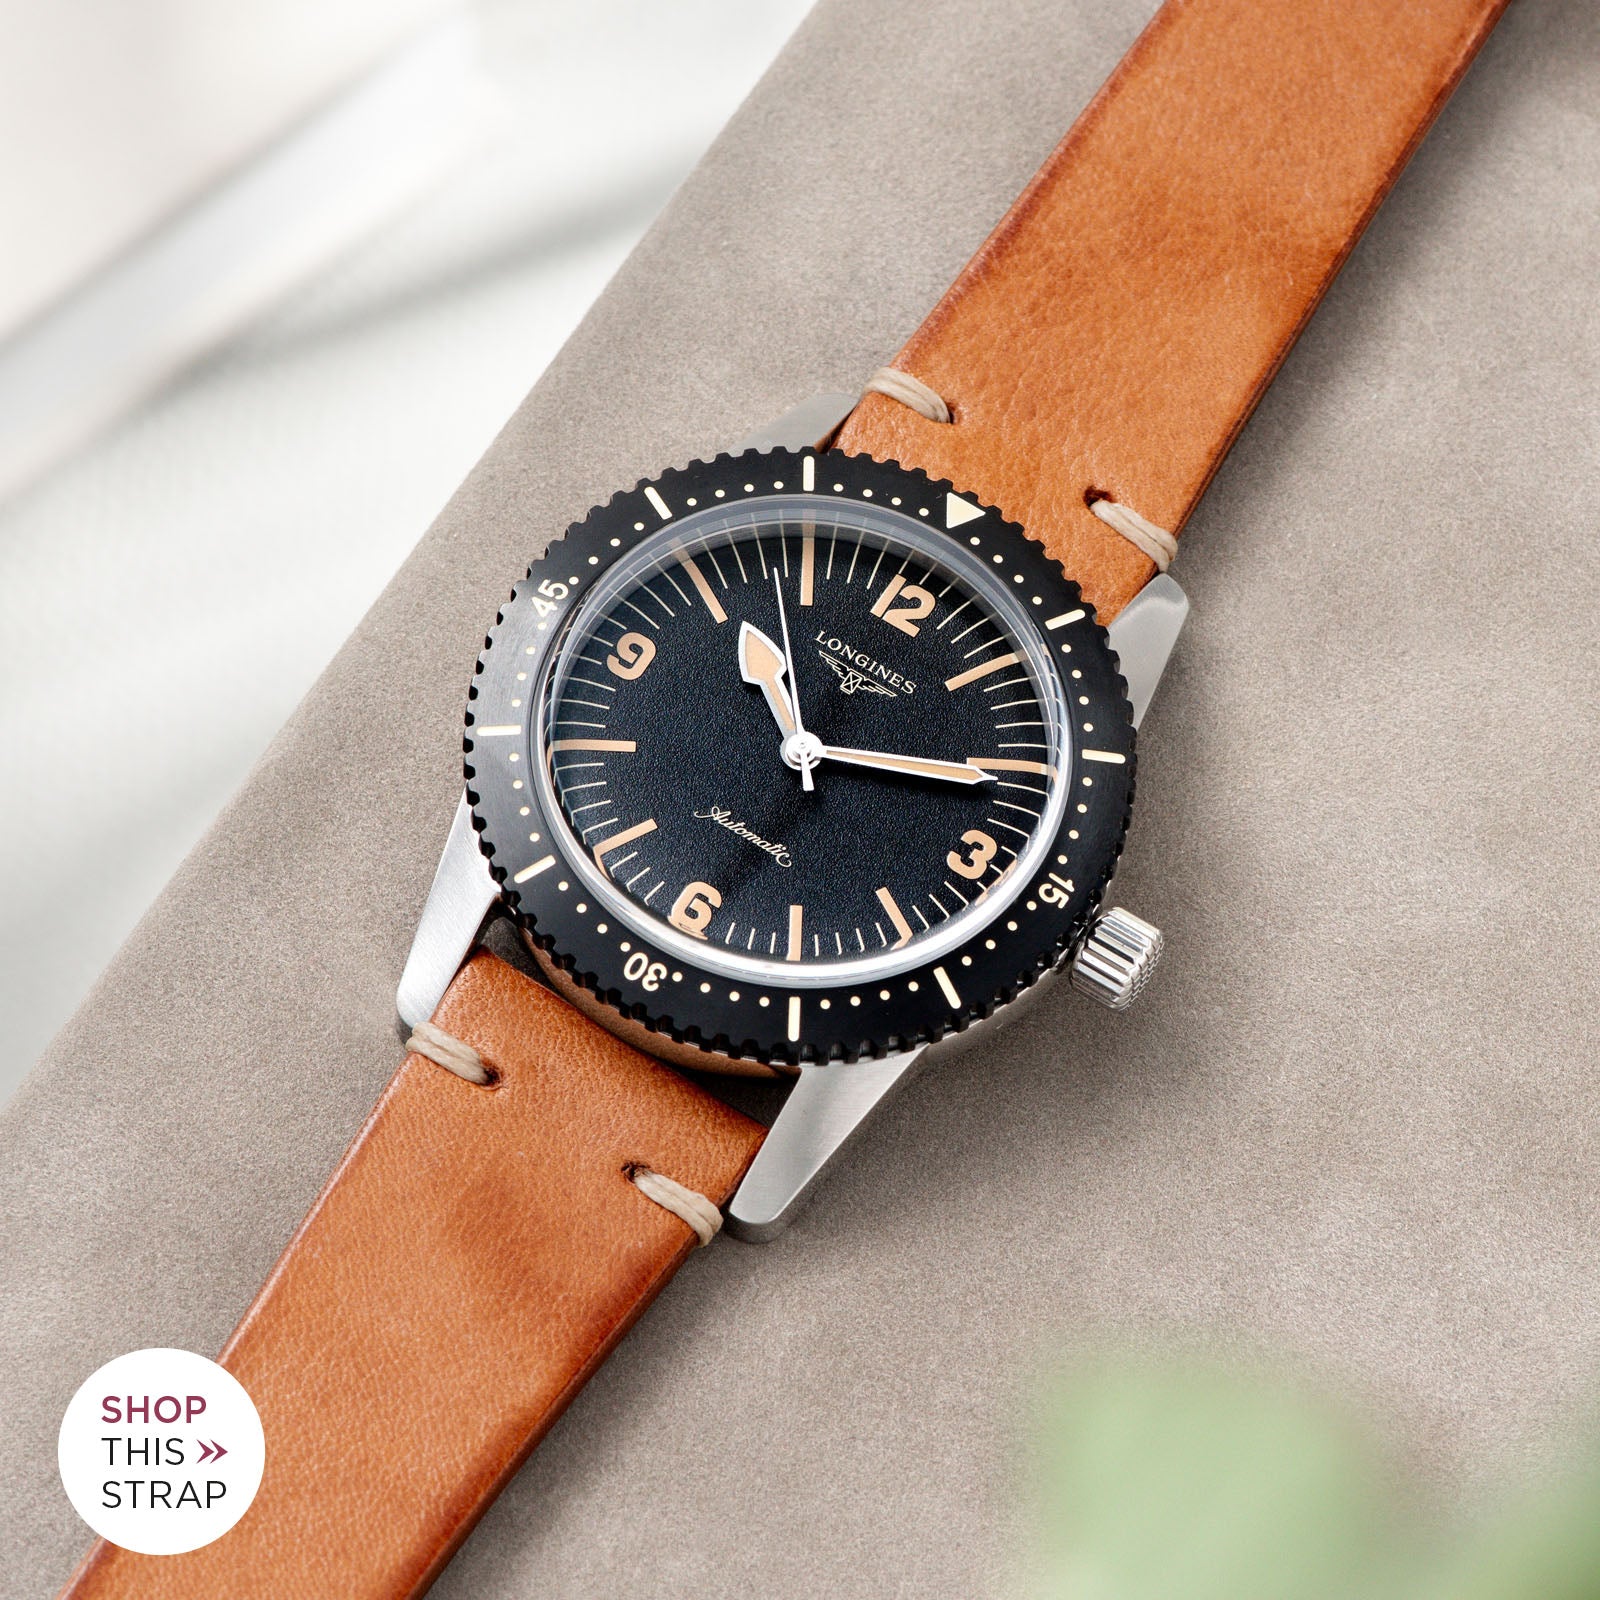 Bulang and Sons_Strap Guide_Longines Skin Diver__Caramel Brown Leather Watch Strap